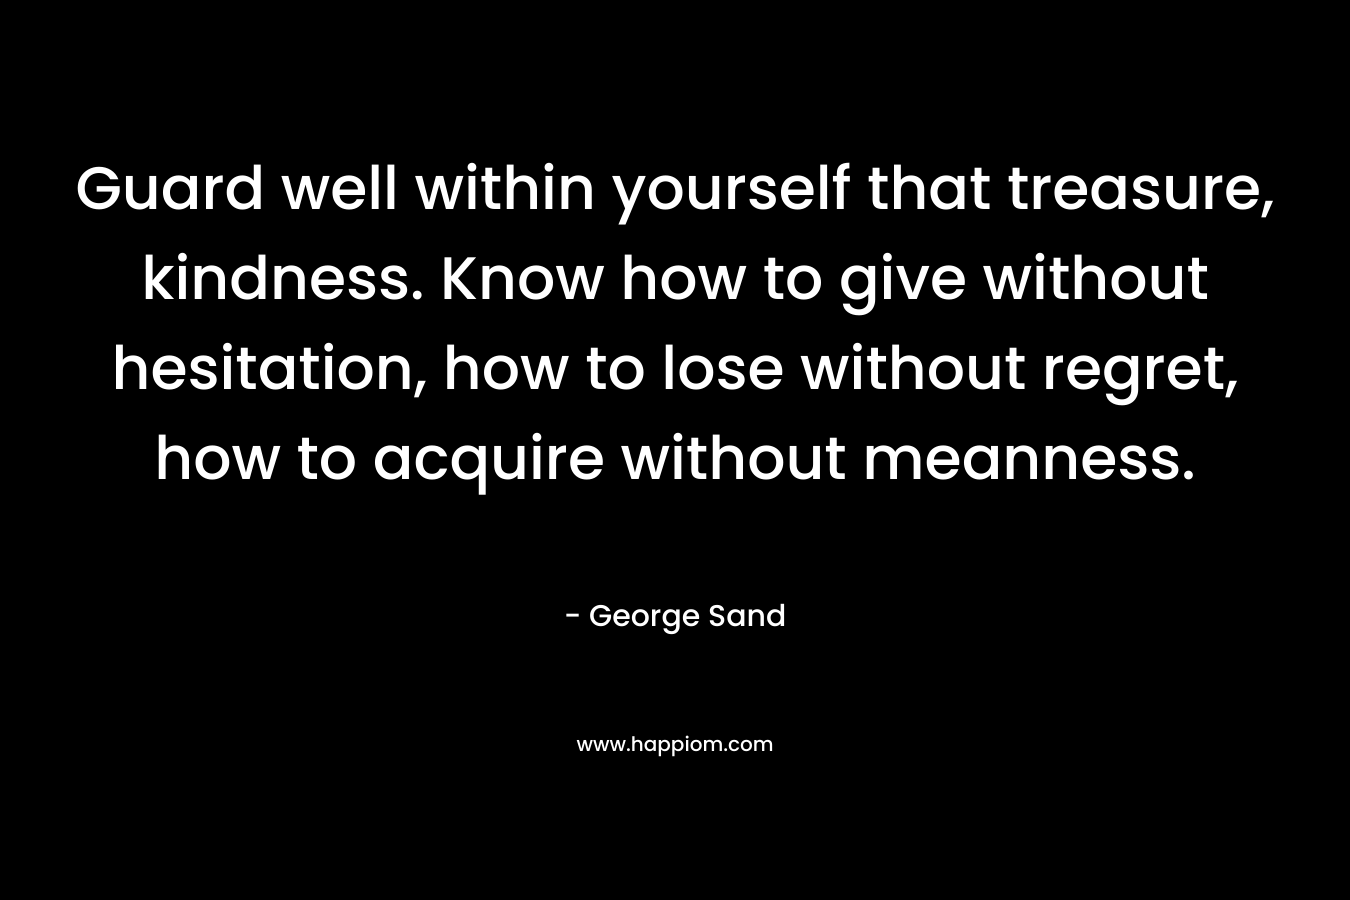 Guard well within yourself that treasure, kindness. Know how to give without hesitation, how to lose without regret, how to acquire without meanness. – George Sand